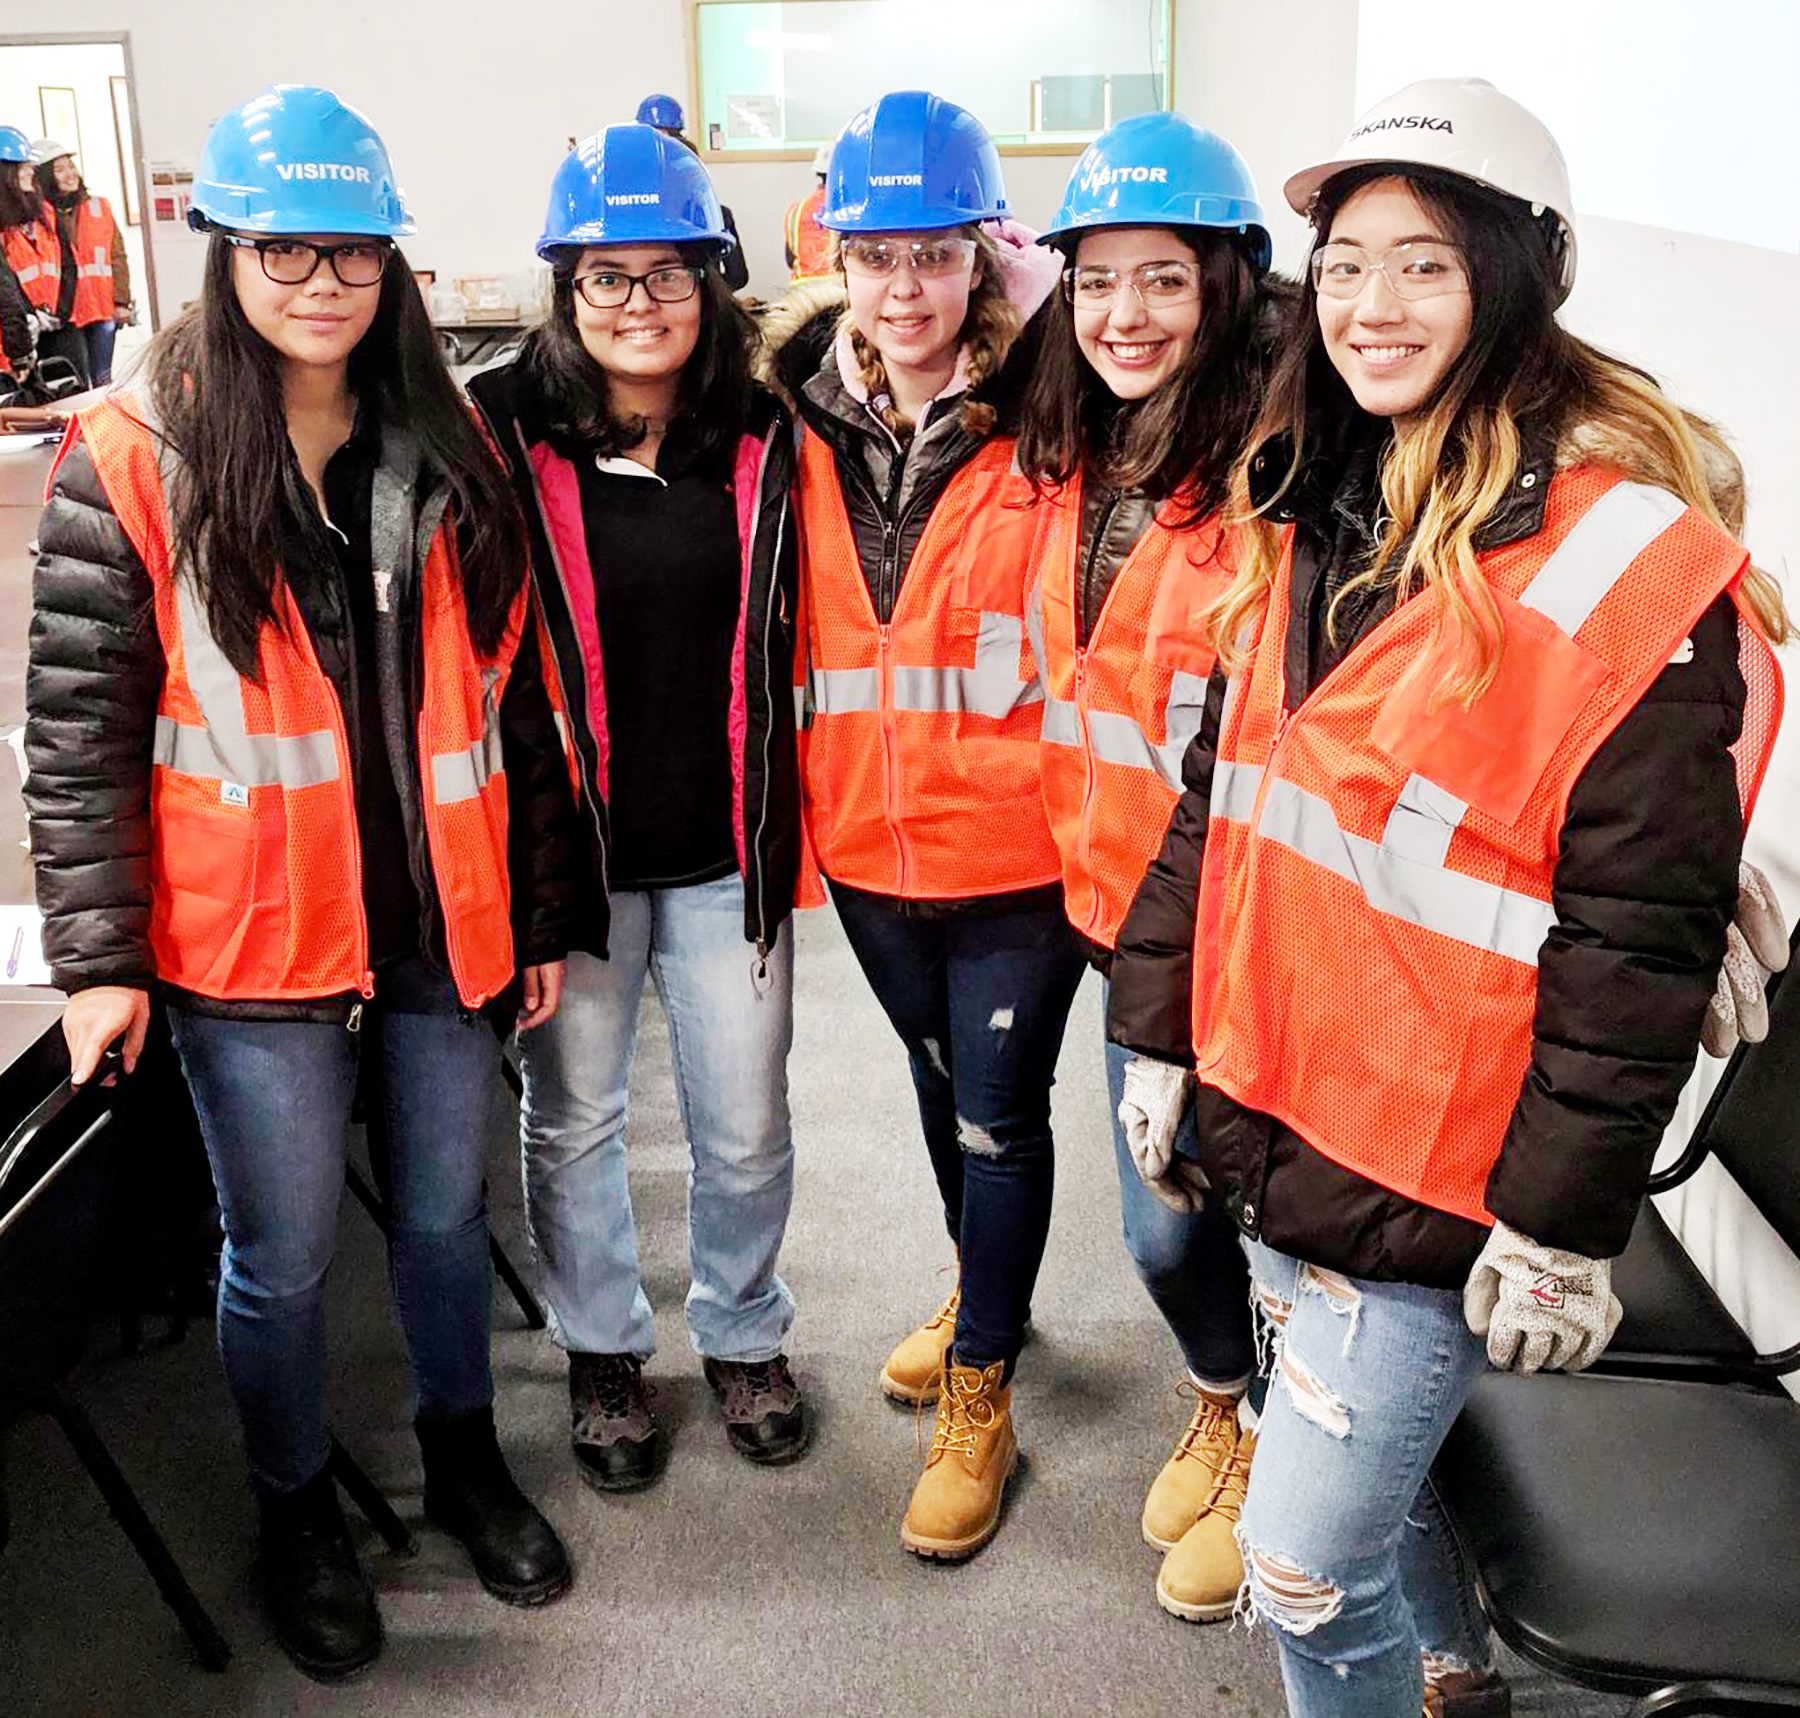 Members of the South High Robotics Team participated in the Skanska Day of Discovery on Nov. 12, 2018. (Photo courtesy of the Great Neck Public Schools)